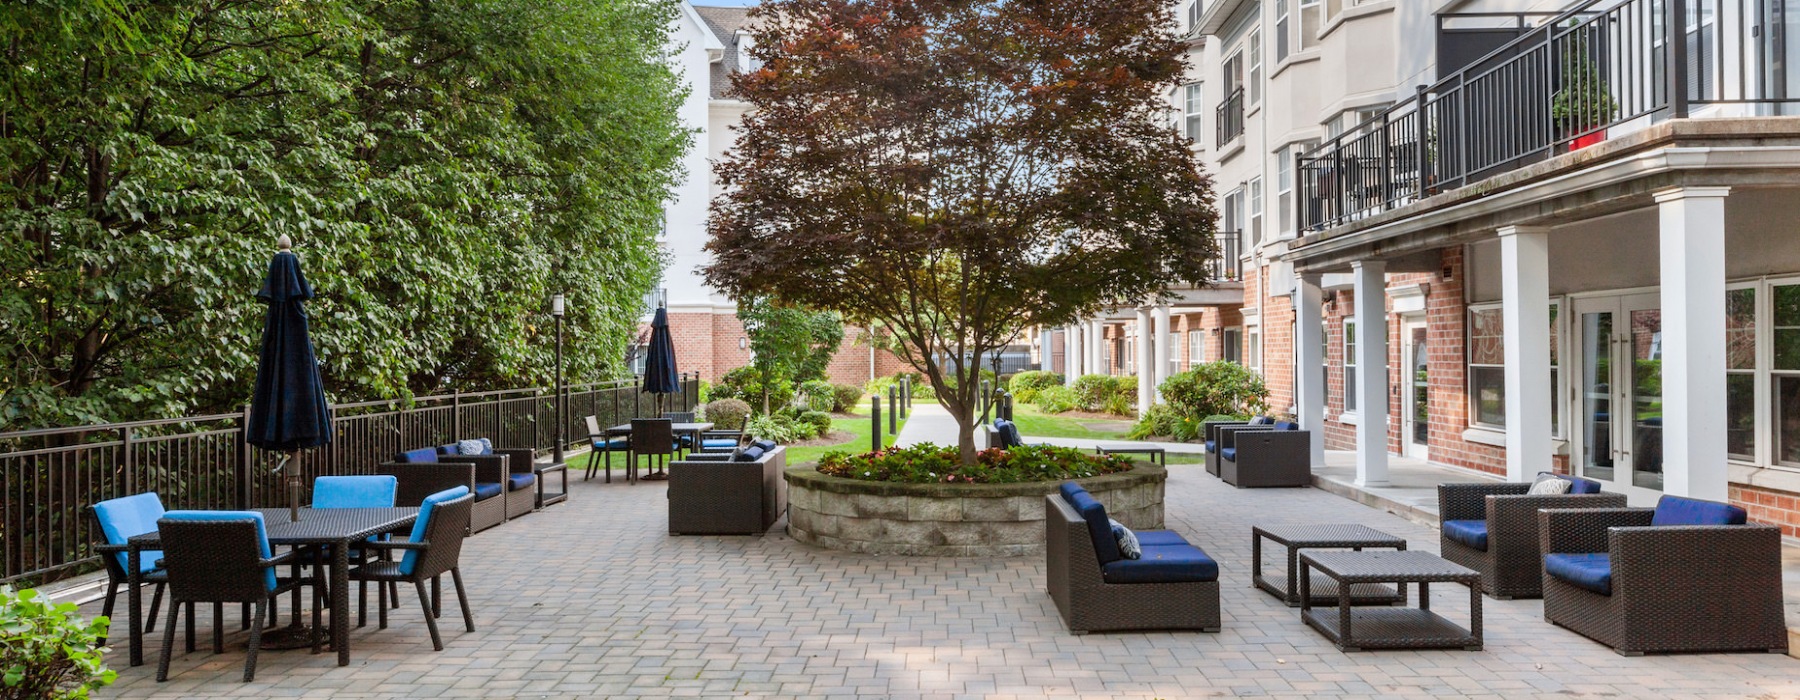 outdoor courtyard with seating area